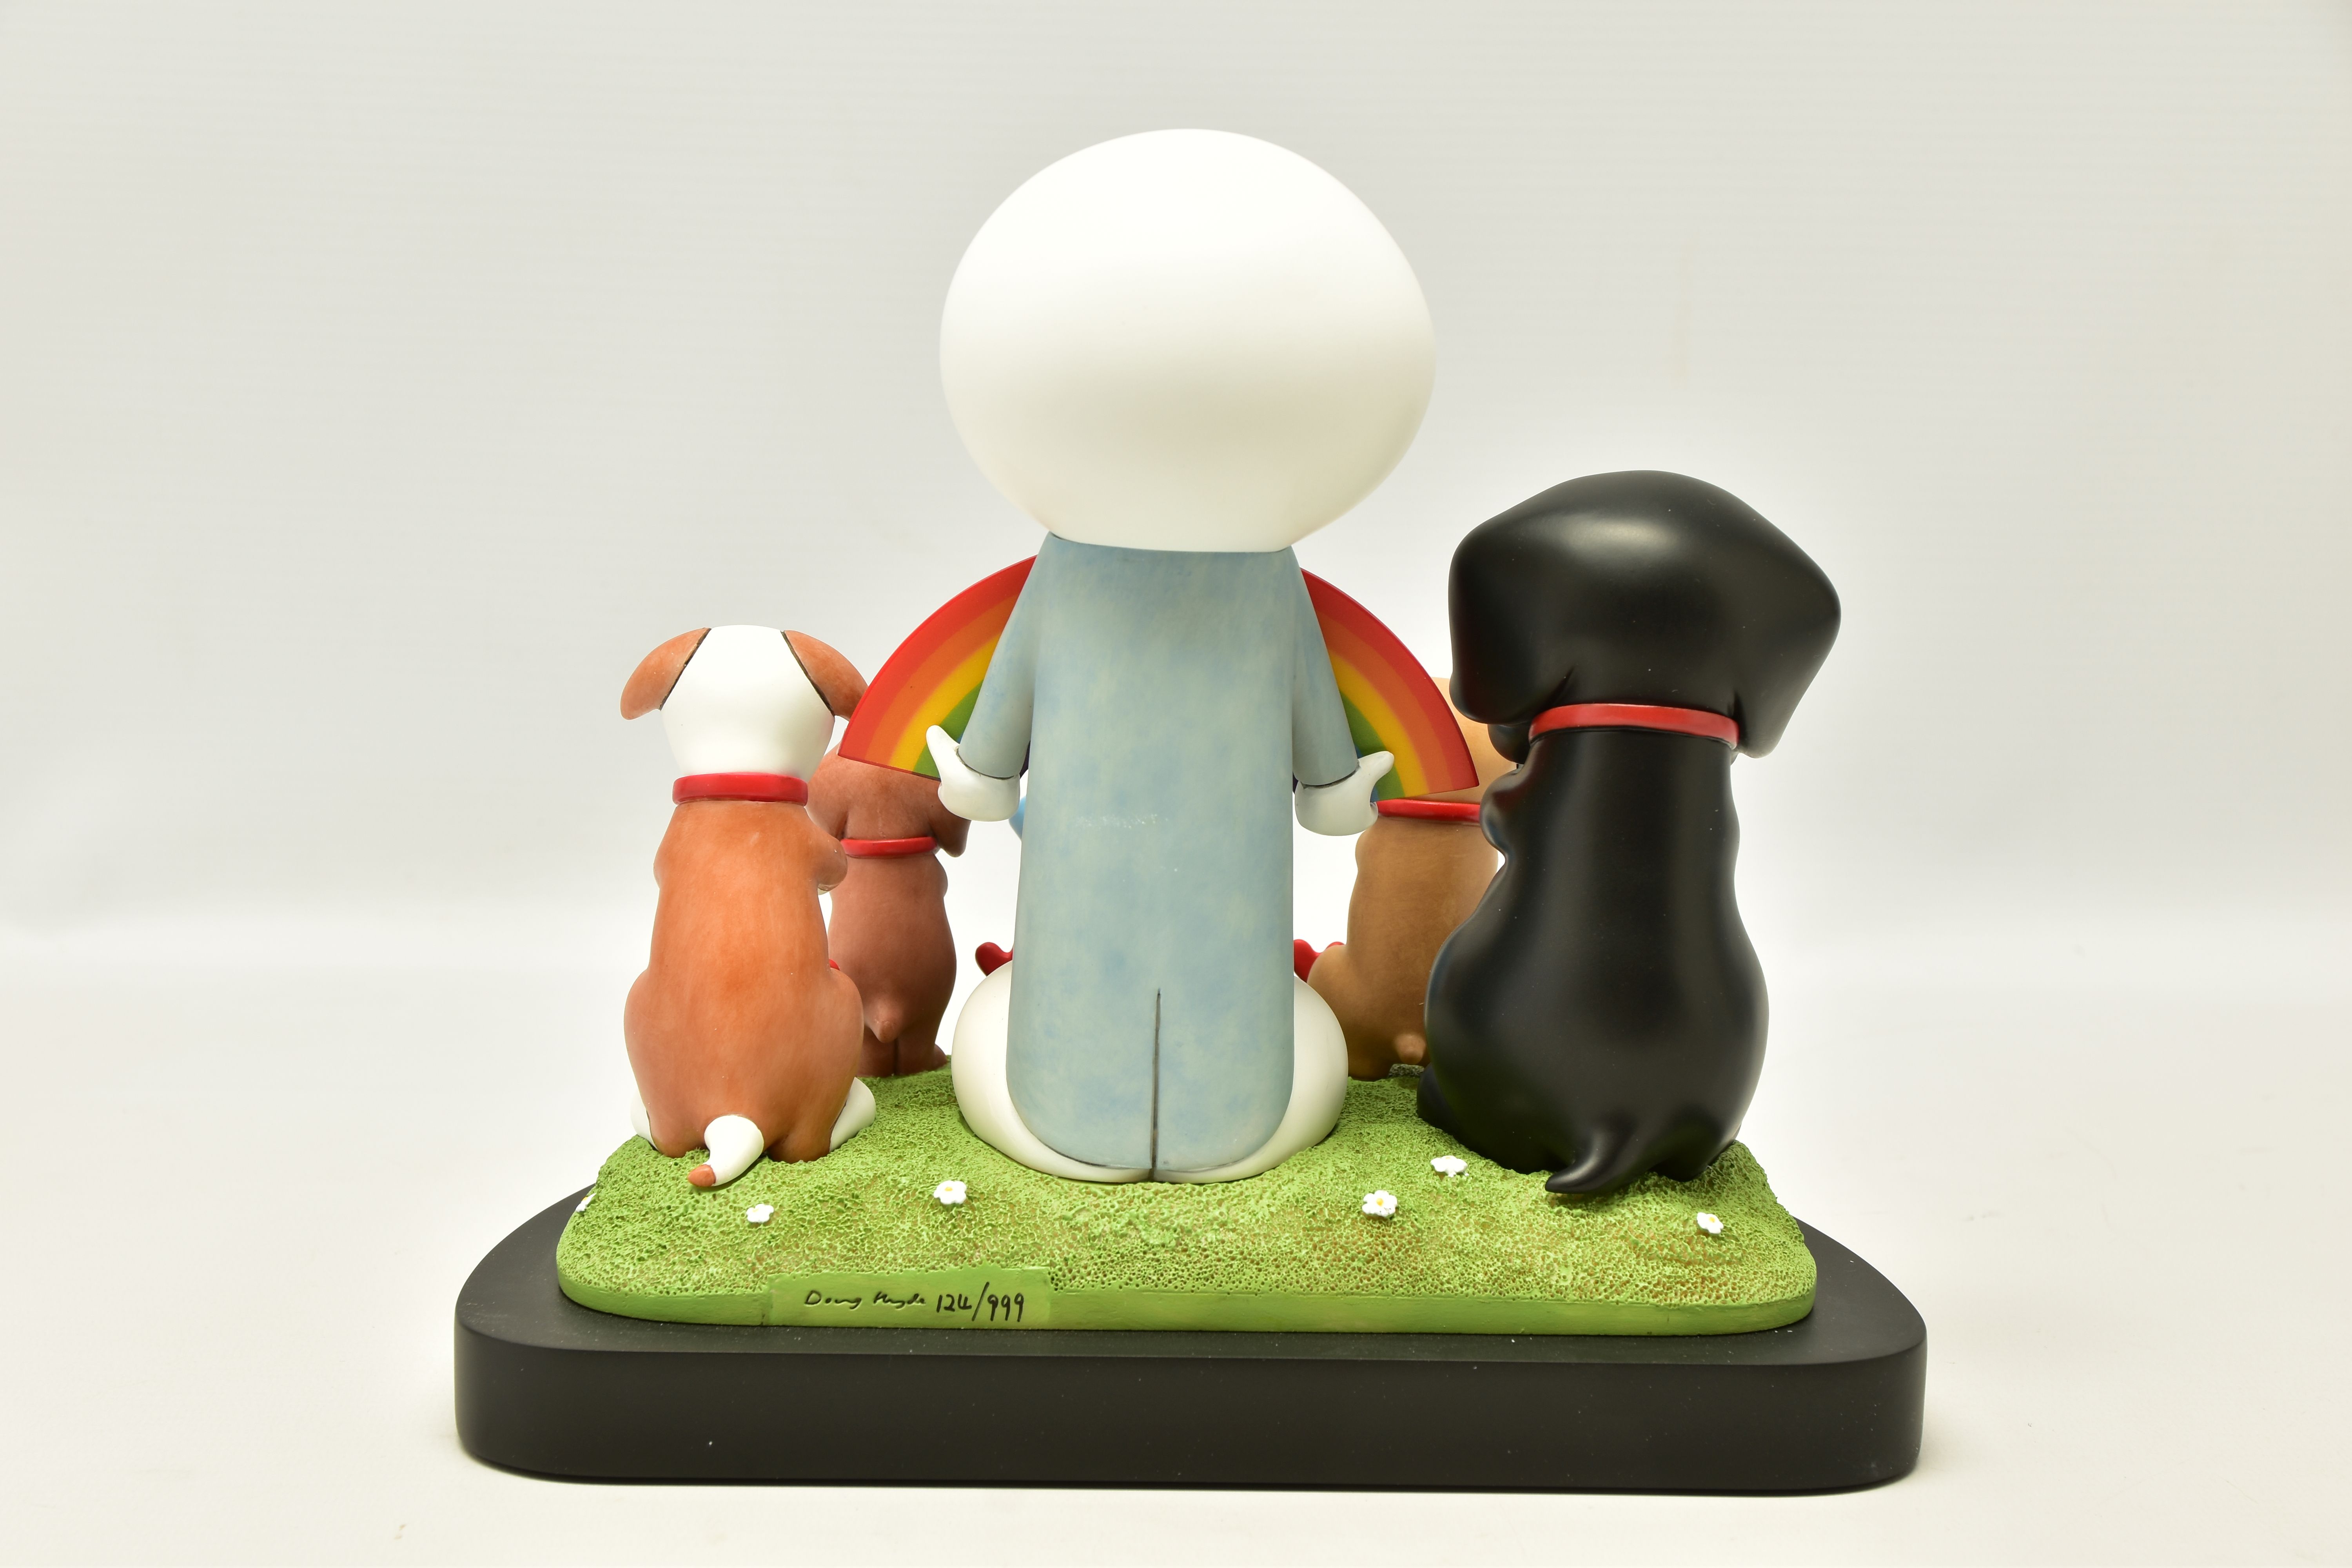 DOUG HYDE (BRITISH 1972) 'THANK YOU' a limited edition sculpture in recognition of NHS workers 124/ - Image 5 of 9